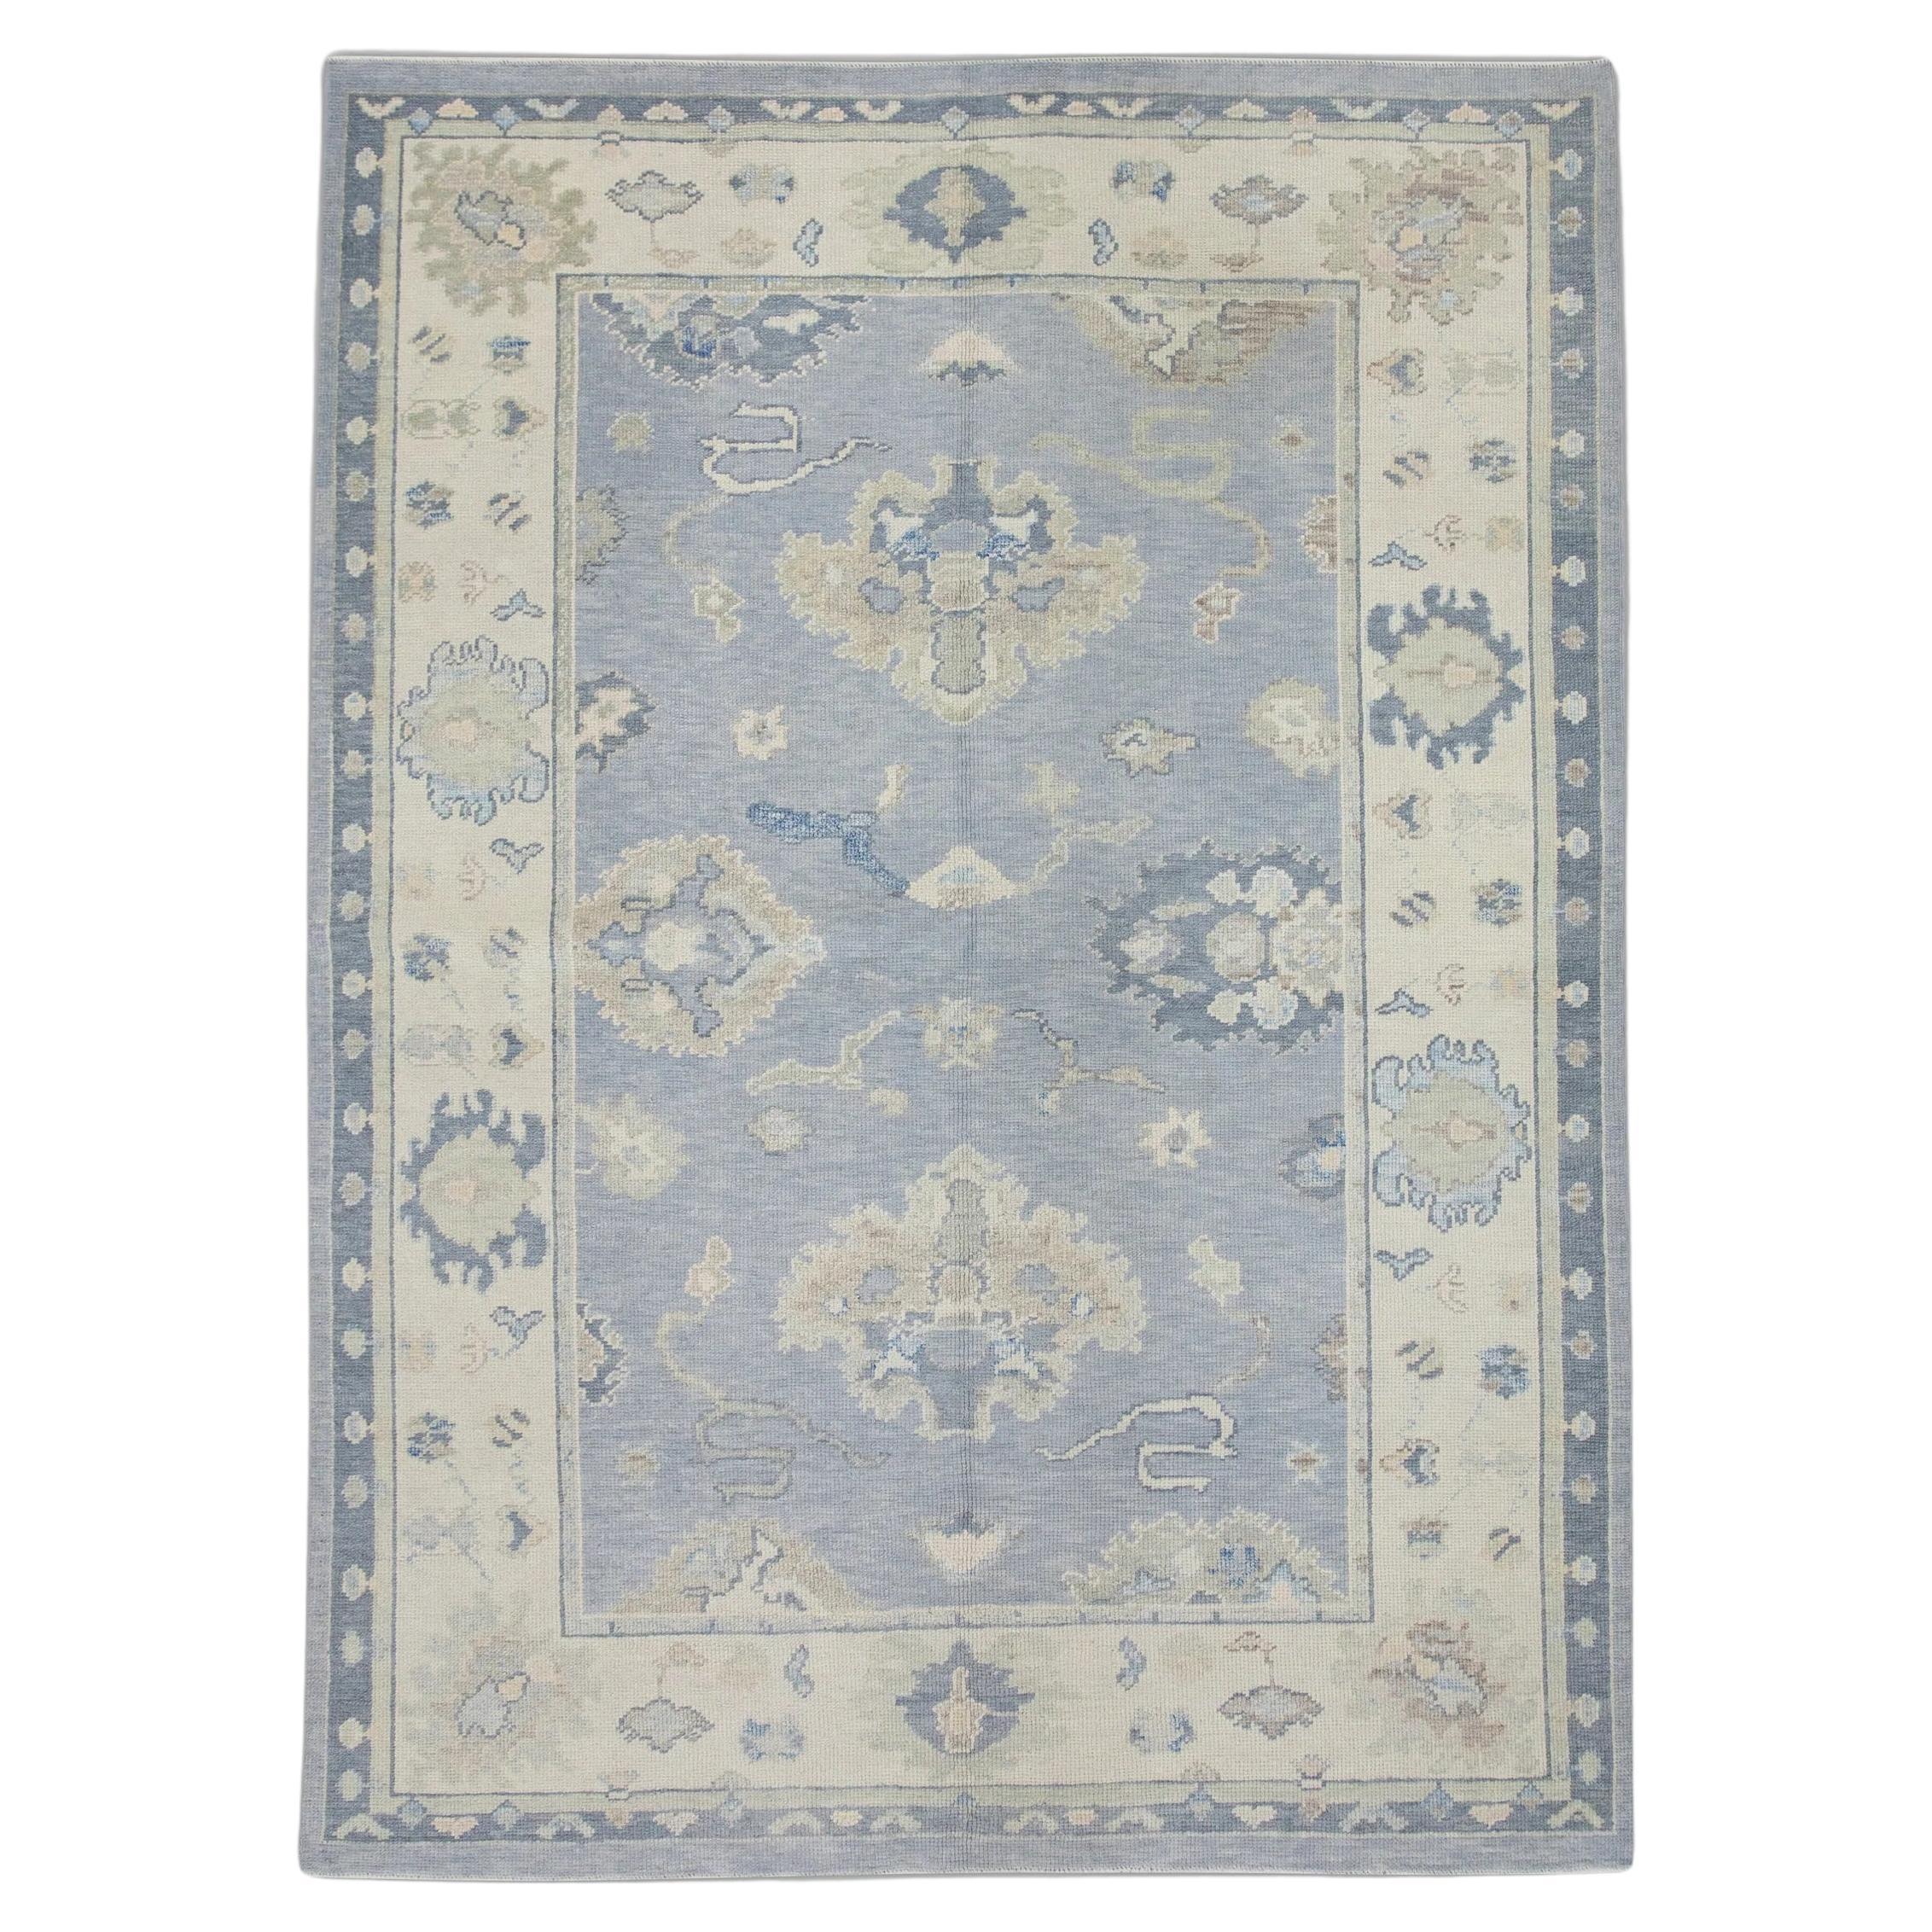 Handwoven Wool Floral Design Turkish Oushak Rug in Periwinkle Blue 5'11" x 7'10" For Sale